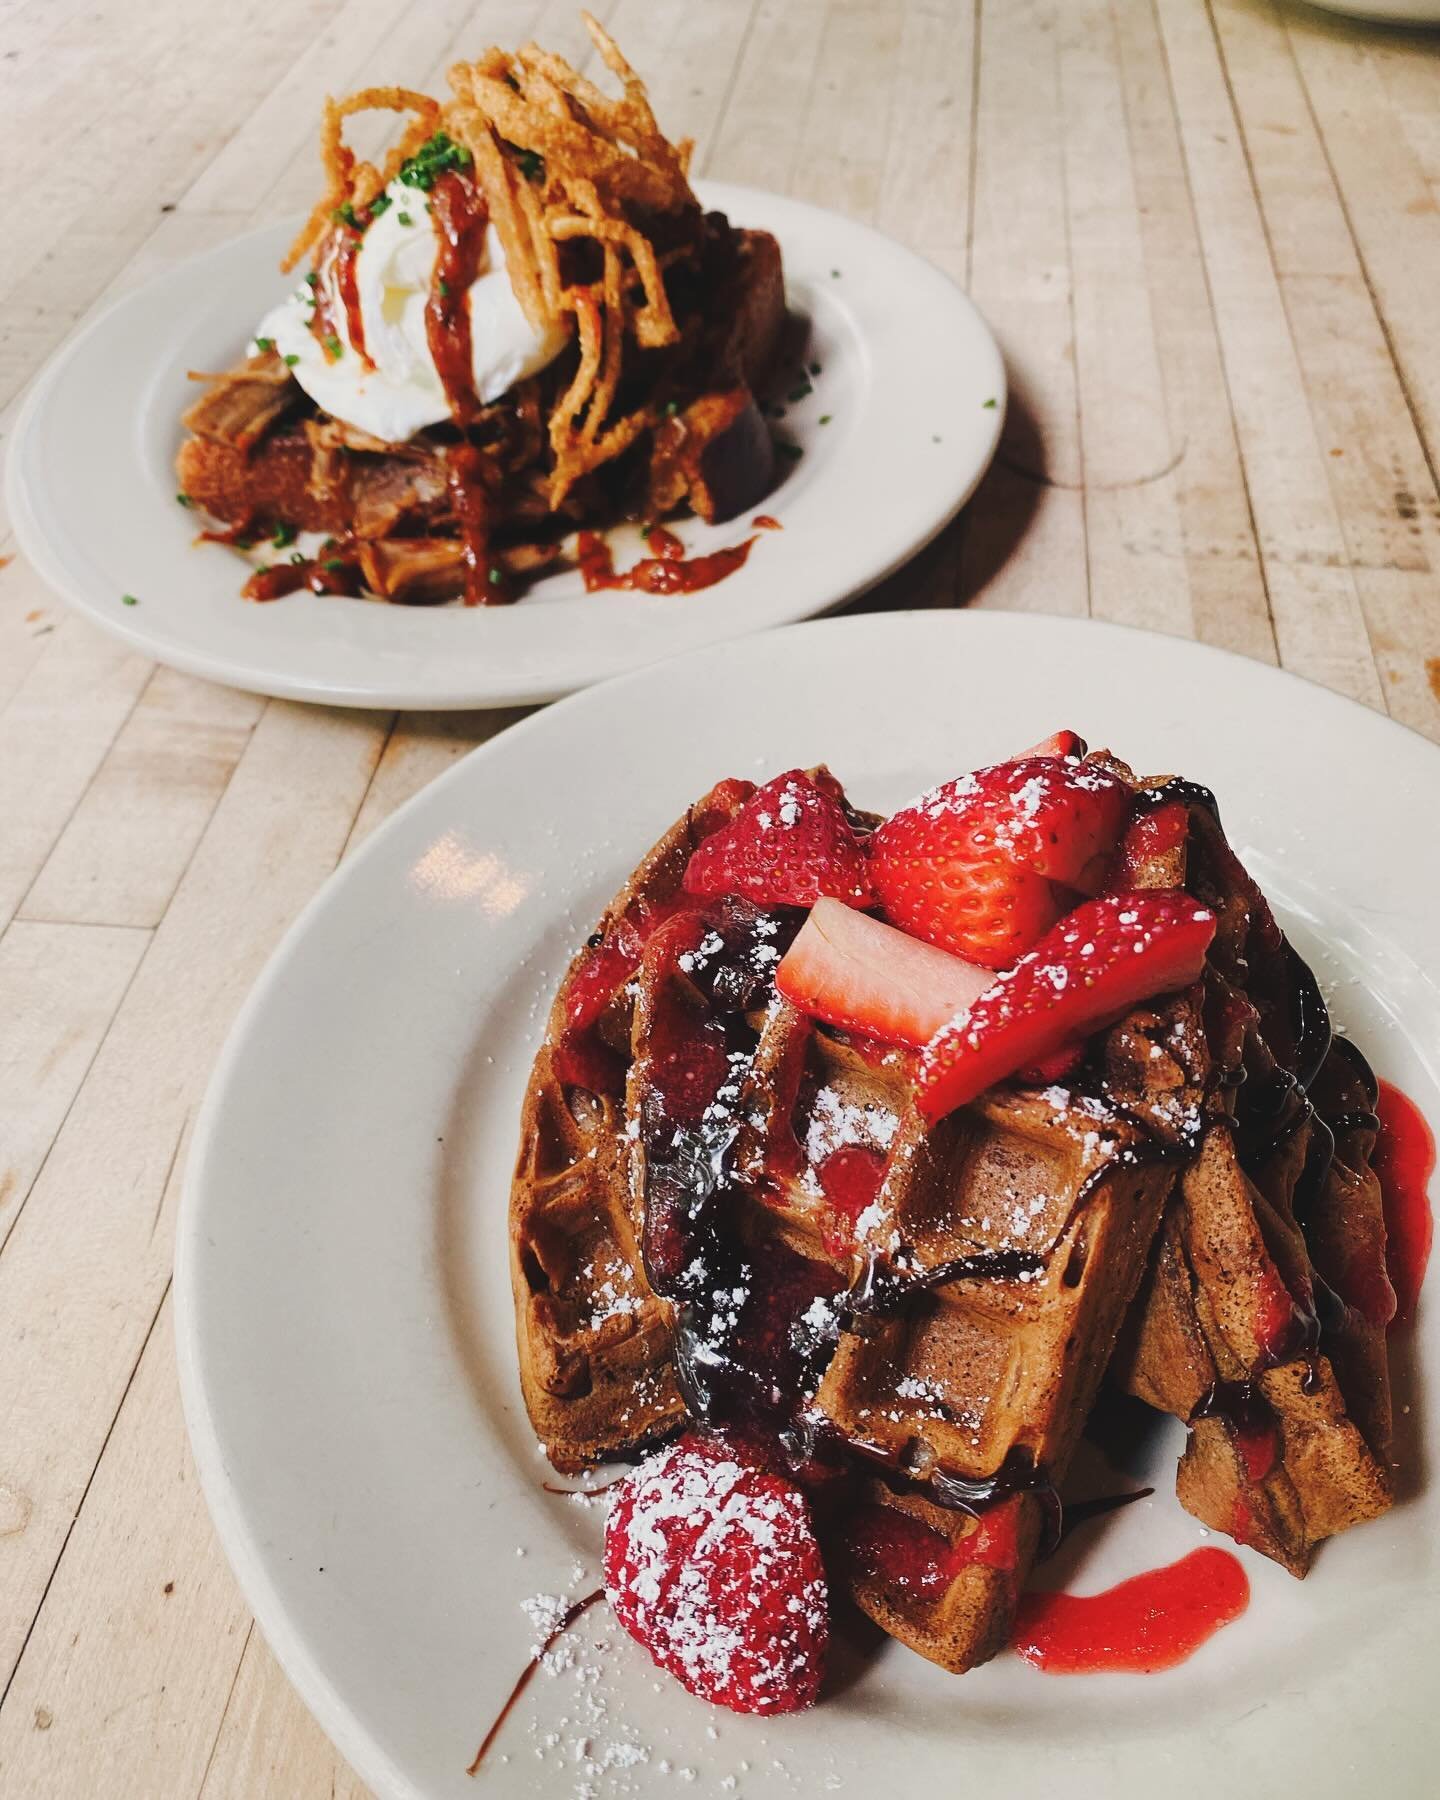 Weekend specials! Chocolate Nutella Waffle, strawberry syrup. BBQ Pork Benedict, over @tgmbread texas toast. And don&rsquo;t forget about our NEW homemade boozy slushies &mdash; Strawberry Fros&eacute; and Watermelon Lemonade Mojito! 
#westeggcafe bu